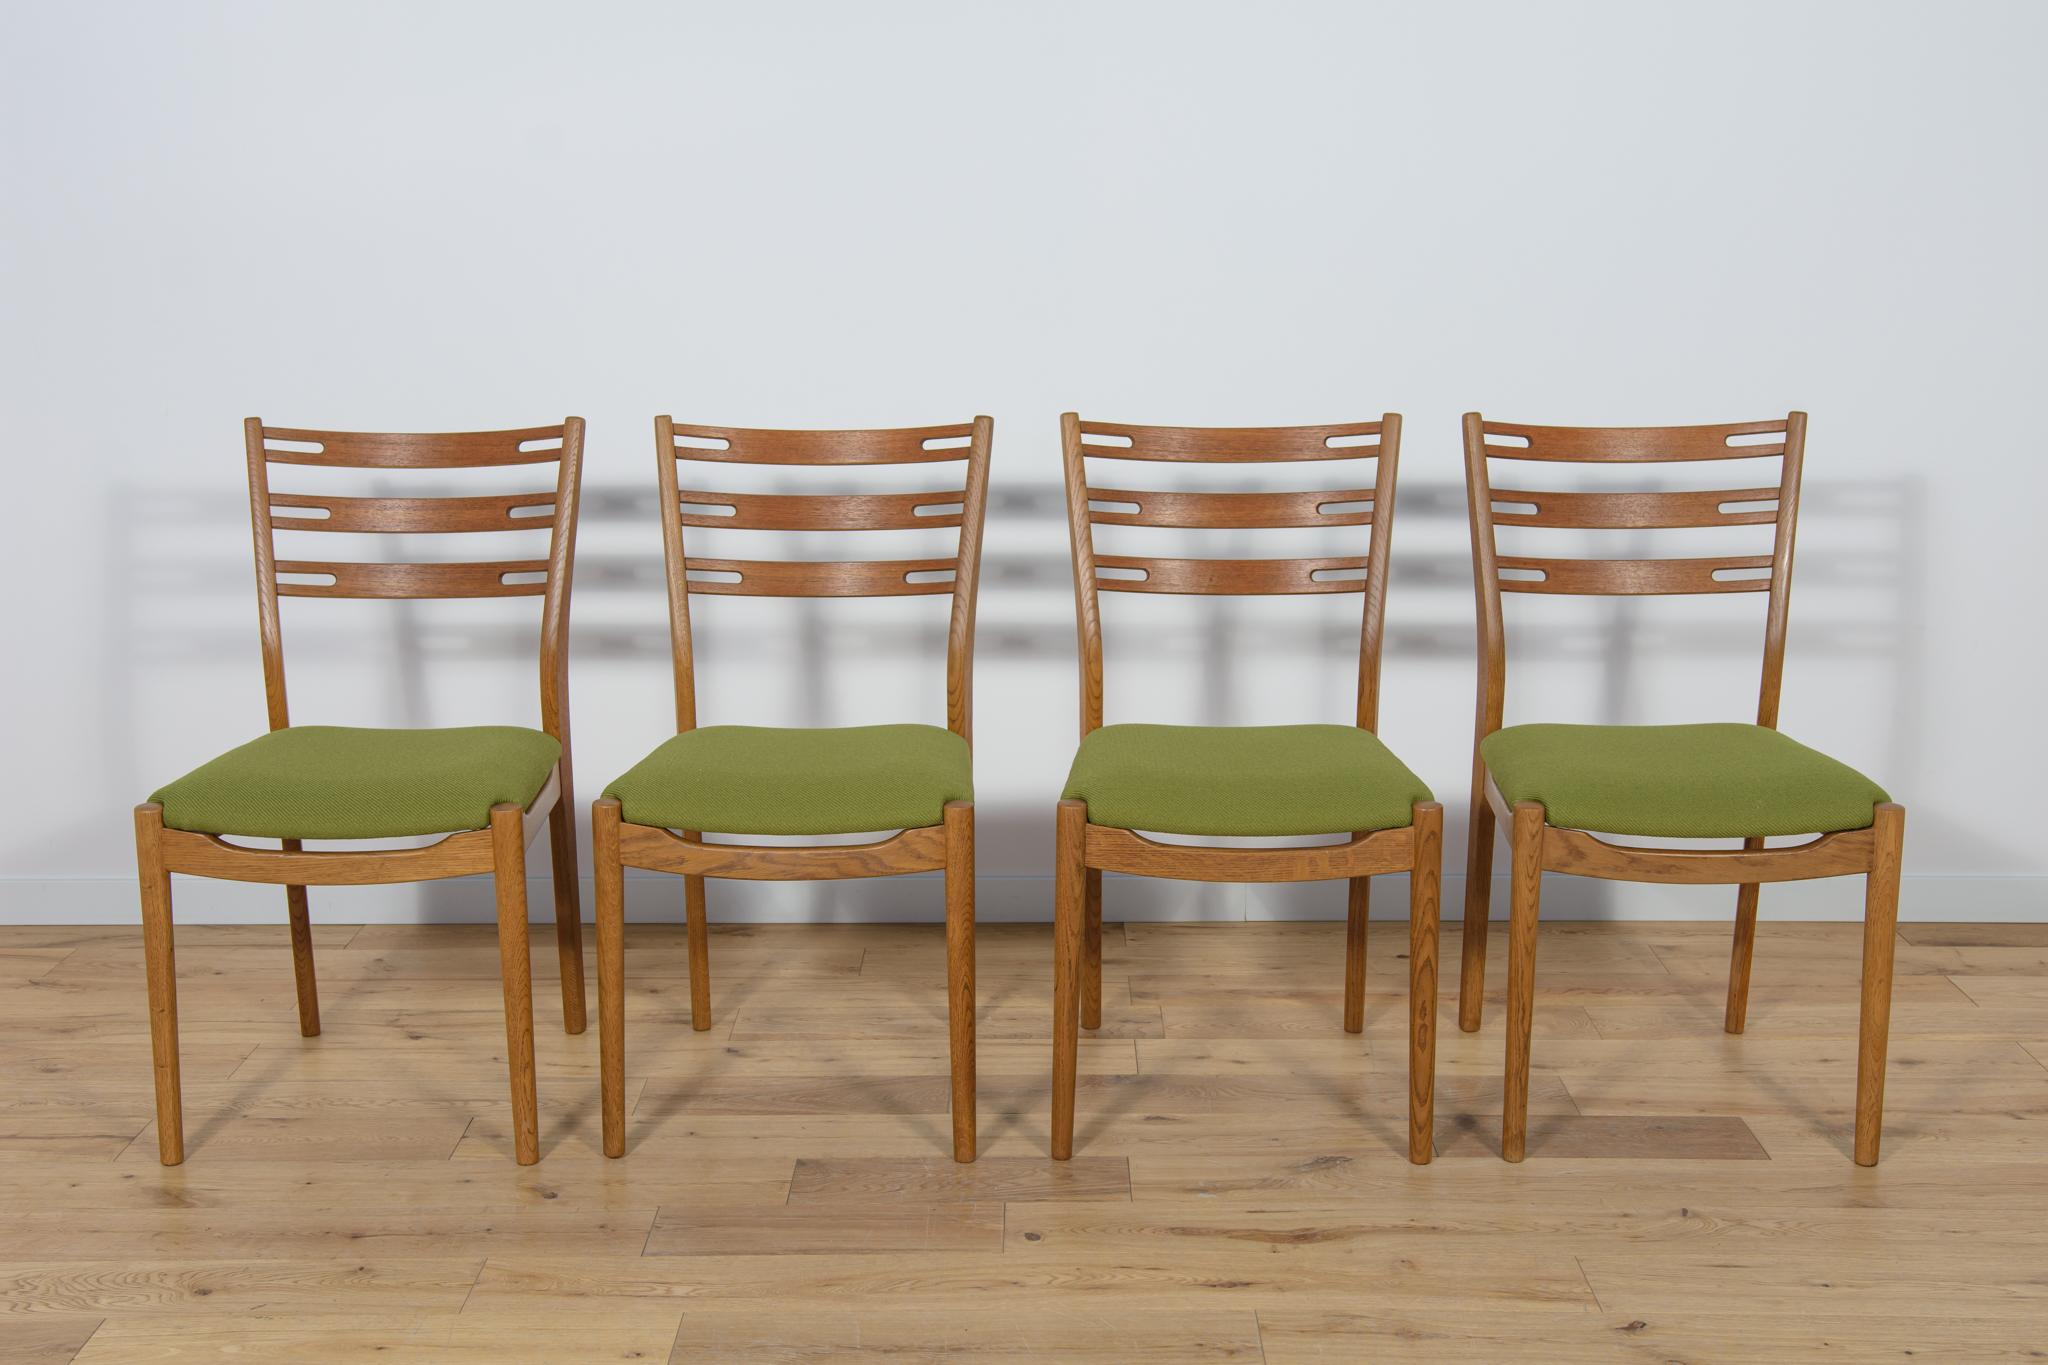 Dining chairs Model 210 made by Farstrup in Denmark in the 1960s.  The frame is made of oak wood, the backrests are made of teak, the whole has been cleaned of the old surface and finished with oak-colored wax. The foams have been replaced and